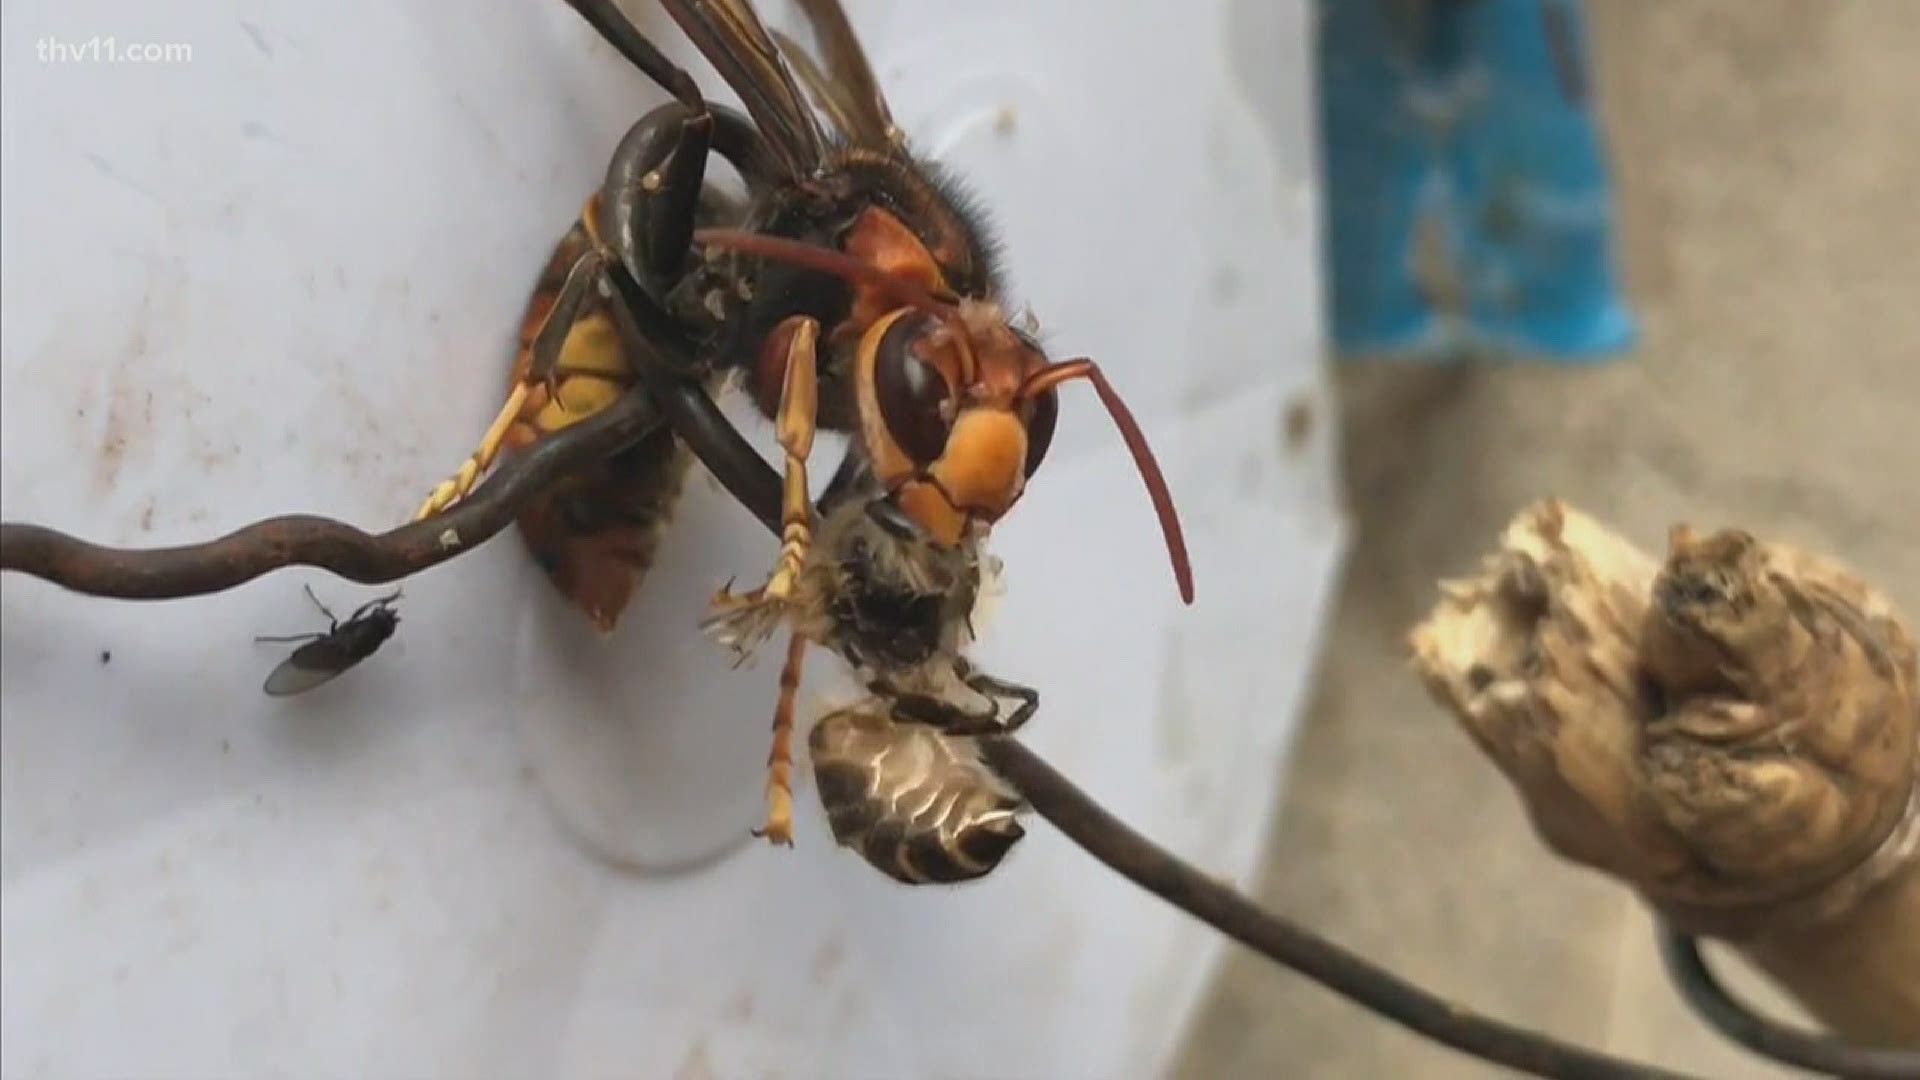 Everyone has been frightened by talk of the murder hornets. The Arkansas Department of Agriculture tells us what we need to know about the invasive species.